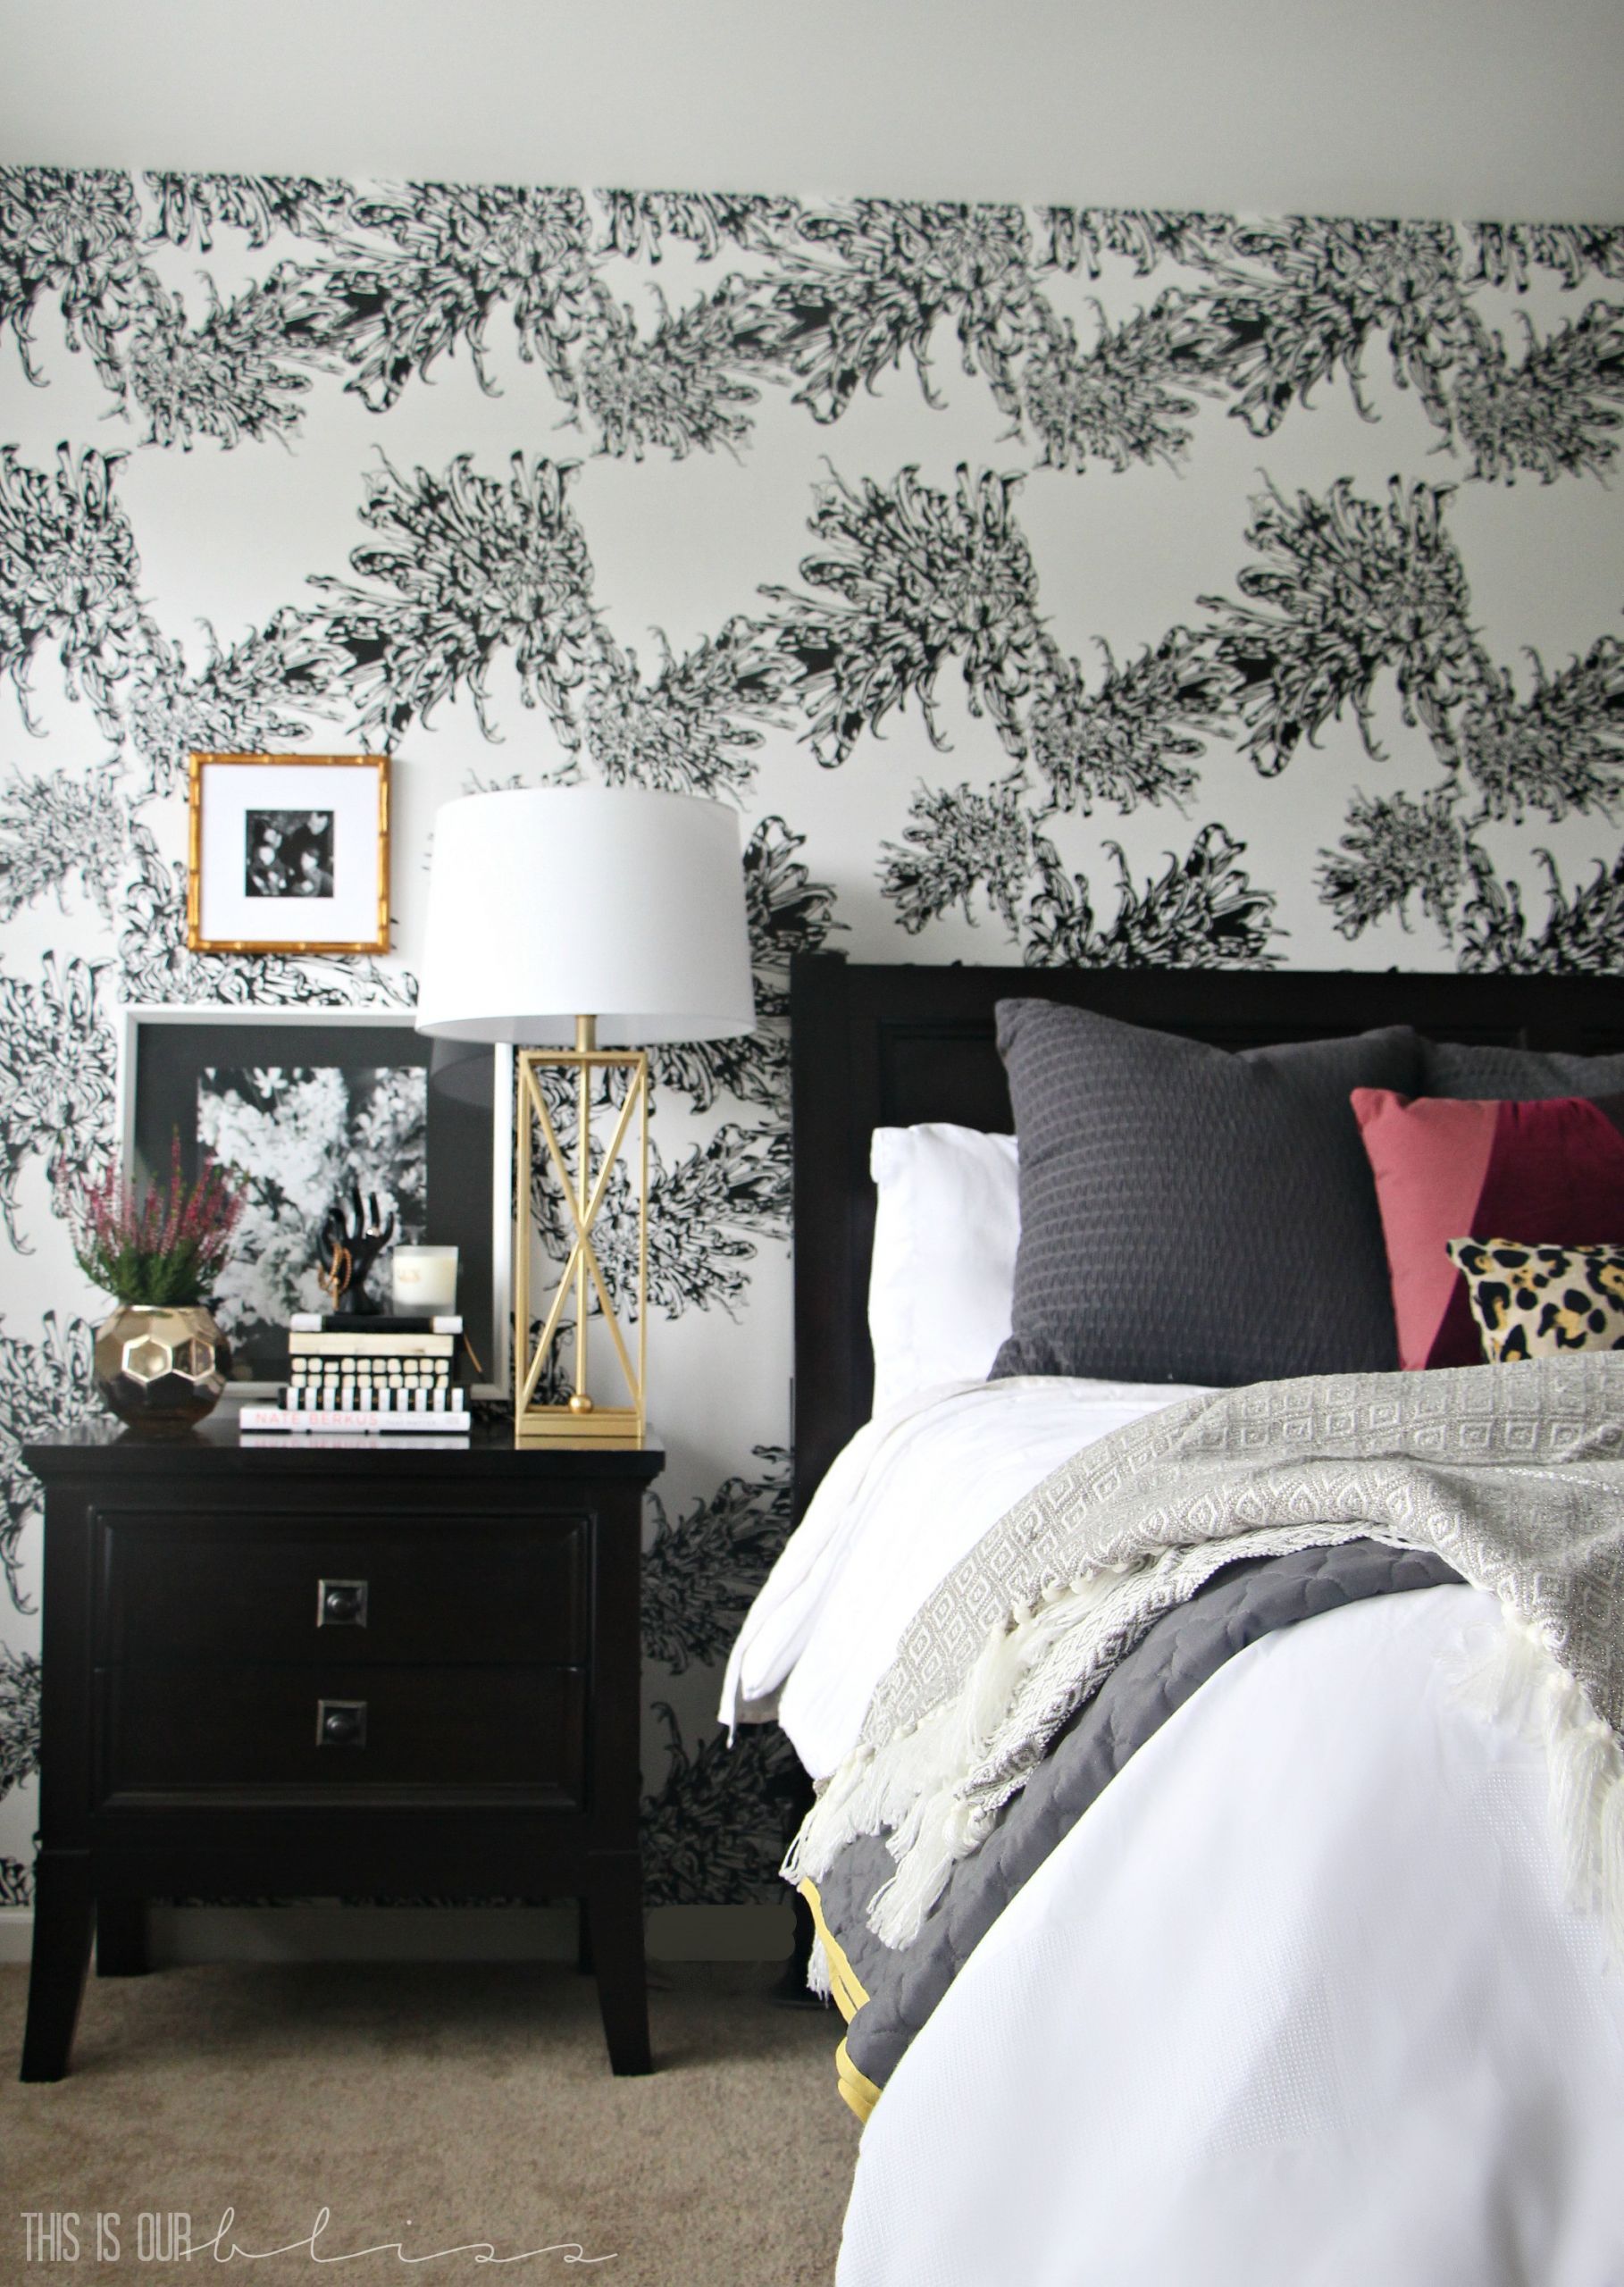 Wallpaper Accent Wall Bedroom
 Master Bedroom Accent Wall with Wallpaper This is our Bliss